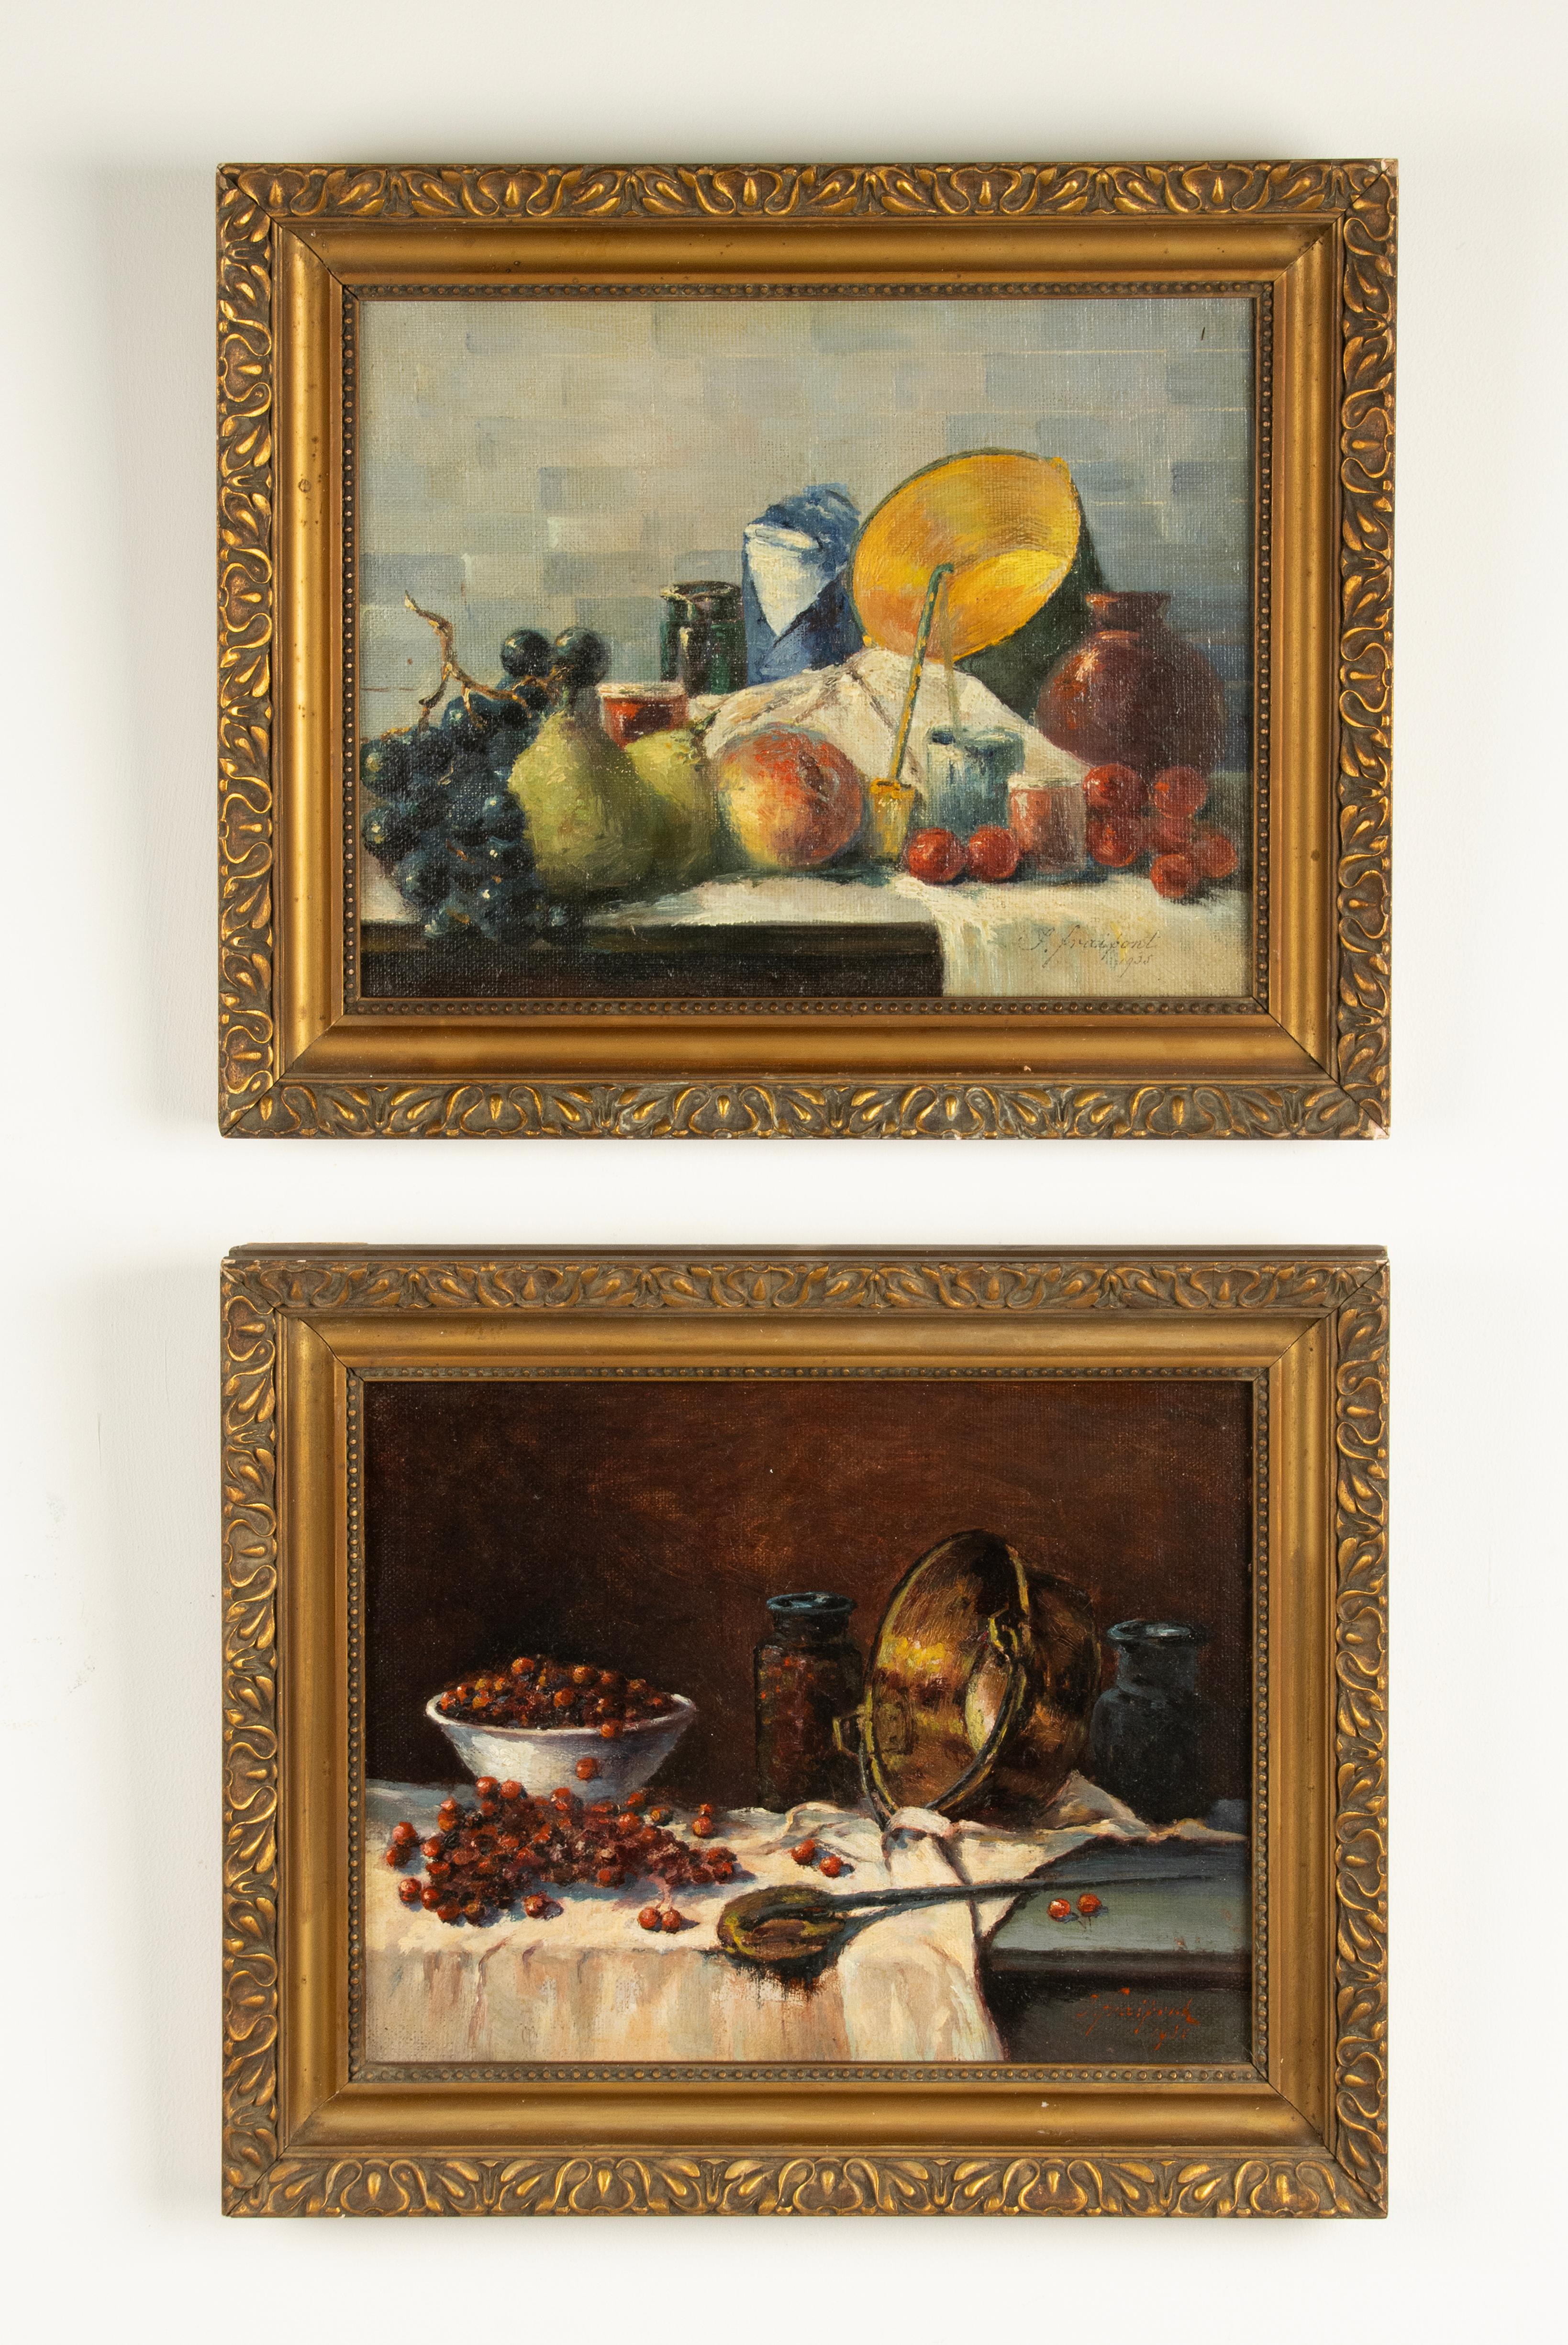 A beautiful pair of paintings of fruit still lifes, oil paint on canvas.
The paintings are by the Belgian artist Janine Fraipont.
The paintings are dated 1935.
Both paintings have a beautiful color palette. They are framed in original wooden gilded